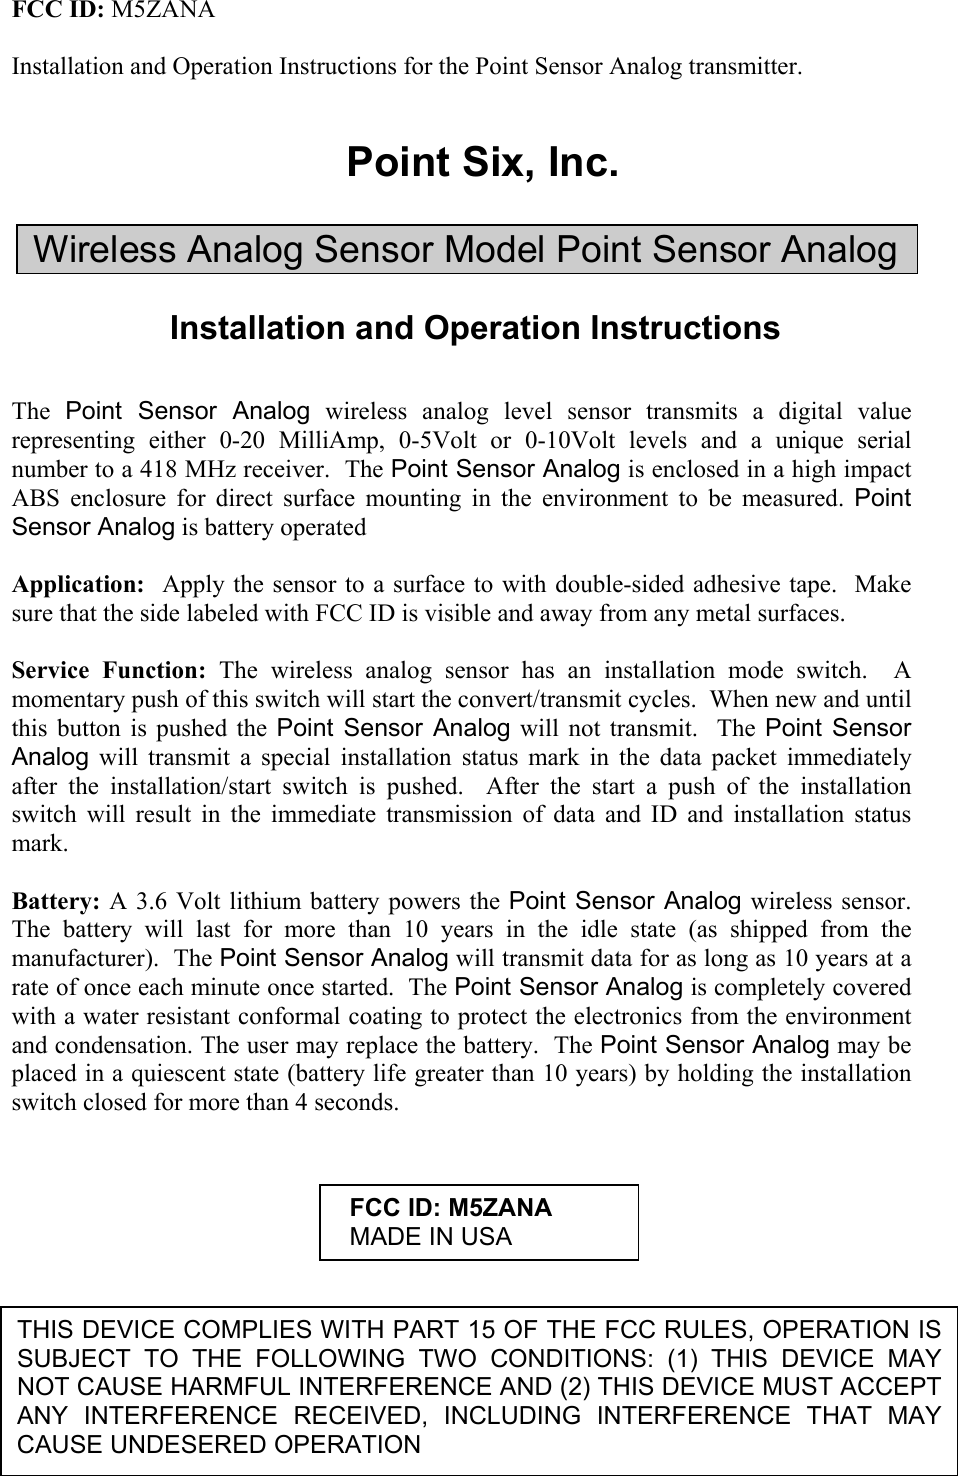 FCC ID: M5ZANA  Installation and Operation Instructions for the Point Sensor Analog transmitter.   Point Six, Inc.  Wireless Analog Sensor Model Point Sensor Analog  Installation and Operation Instructions   The  Point Sensor Analog wireless analog level sensor transmits a digital value representing either 0-20 MilliAmp, 0-5Volt or 0-10Volt levels and a unique serial number to a 418 MHz receiver.  The Point Sensor Analog is enclosed in a high impact ABS enclosure for direct surface mounting in the environment to be measured. Point Sensor Analog is battery operated  Application:  Apply the sensor to a surface to with double-sided adhesive tape.  Make sure that the side labeled with FCC ID is visible and away from any metal surfaces.    Service Function: The wireless analog sensor has an installation mode switch.  A momentary push of this switch will start the convert/transmit cycles.  When new and until this button is pushed the Point Sensor Analog will not transmit.  The Point Sensor Analog will transmit a special installation status mark in the data packet immediately after the installation/start switch is pushed.  After the start a push of the installation switch will result in the immediate transmission of data and ID and installation status mark.   Battery: A 3.6 Volt lithium battery powers the Point Sensor Analog wireless sensor.  The battery will last for more than 10 years in the idle state (as shipped from the manufacturer).  The Point Sensor Analog will transmit data for as long as 10 years at a rate of once each minute once started.  The Point Sensor Analog is completely covered with a water resistant conformal coating to protect the electronics from the environment and condensation. The user may replace the battery.  The Point Sensor Analog may be placed in a quiescent state (battery life greater than 10 years) by holding the installation switch closed for more than 4 seconds.       THIS DEVICE COMPLIES WITH PART 15 OF THE FCC RULES, OPERATION IS SUBJECT TO THE FOLLOWING TWO CONDITIONS: (1) THIS DEVICE MAY NOT CAUSE HARMFUL INTERFERENCE AND (2) THIS DEVICE MUST ACCEPT ANY INTERFERENCE RECEIVED, INCLUDING INTERFERENCE THAT MAY CAUSE UNDESERED OPERATION   FCC ID: M5ZANA   MADE IN USA 